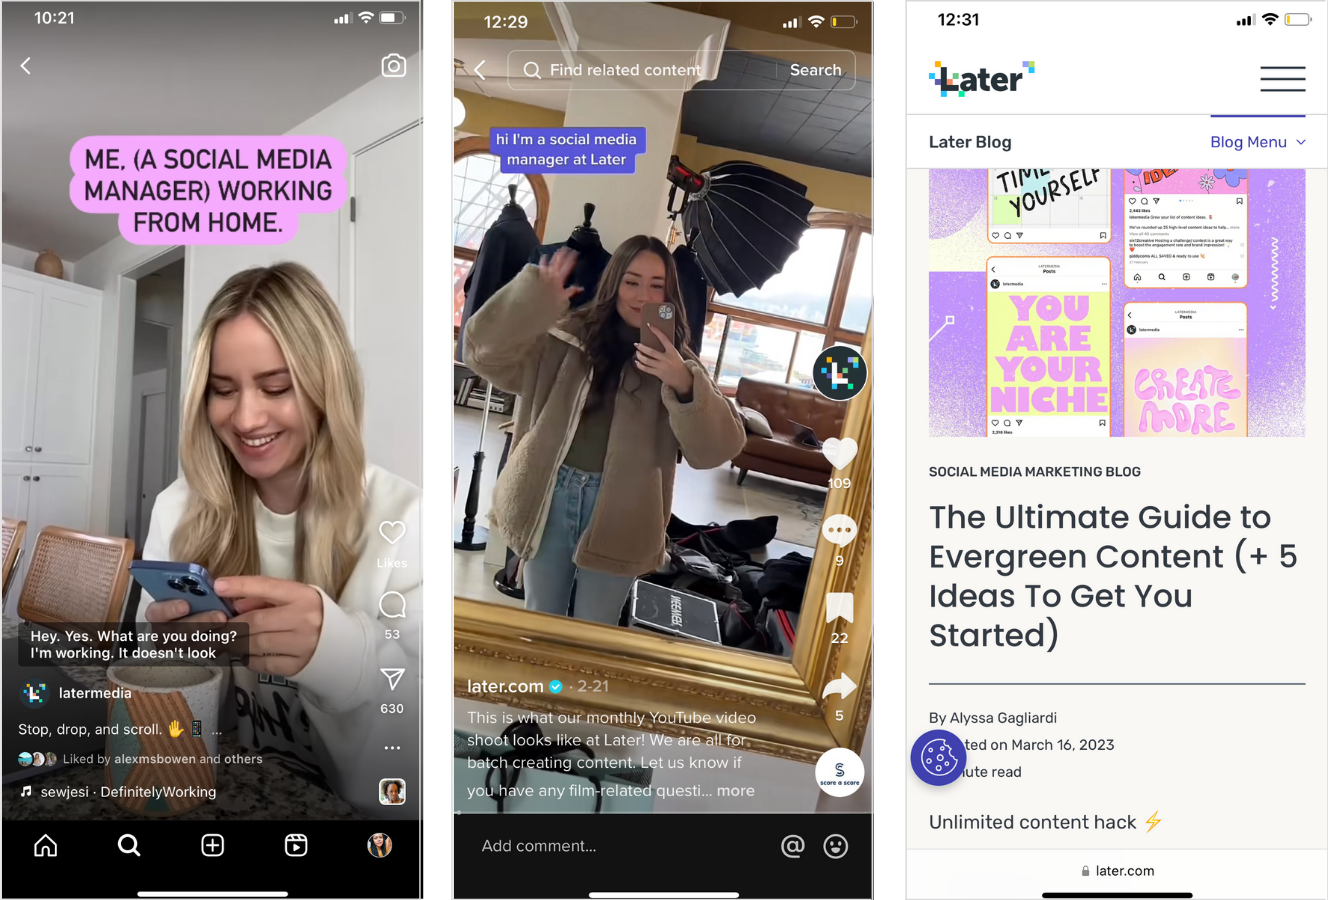 Screenshot x3 of Later content examples. From left to right: Reel, TikTok, and Later's blog. 